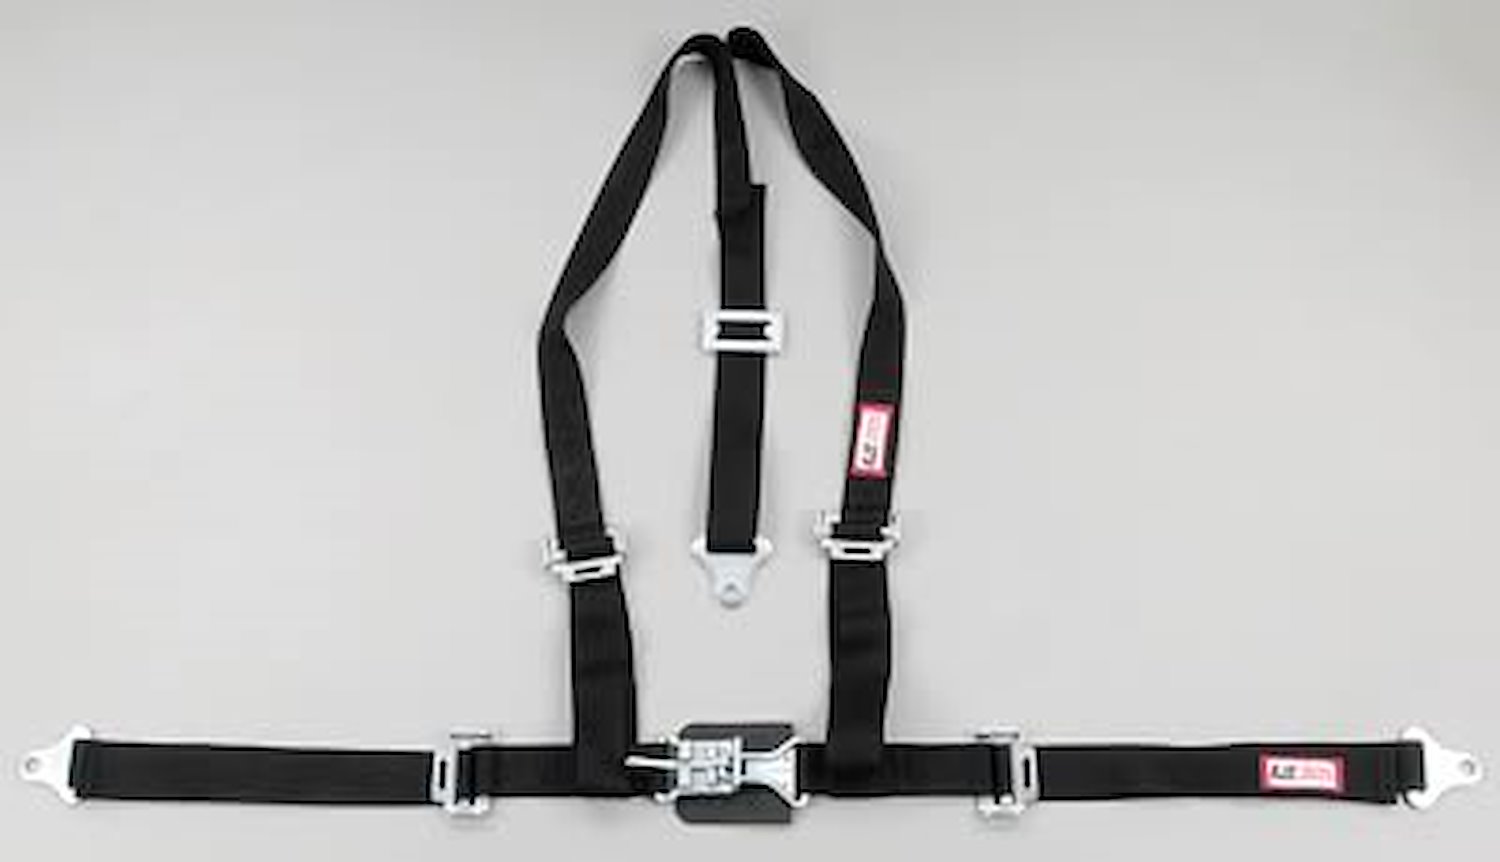 NON-SFI L&L HARNESS 2 PULL DOWN Lap Belt SNAP SEWN IN 2 S.H. Y FLOOR Mount w/STERNUM STRAP WRAP/SNAP BLUE